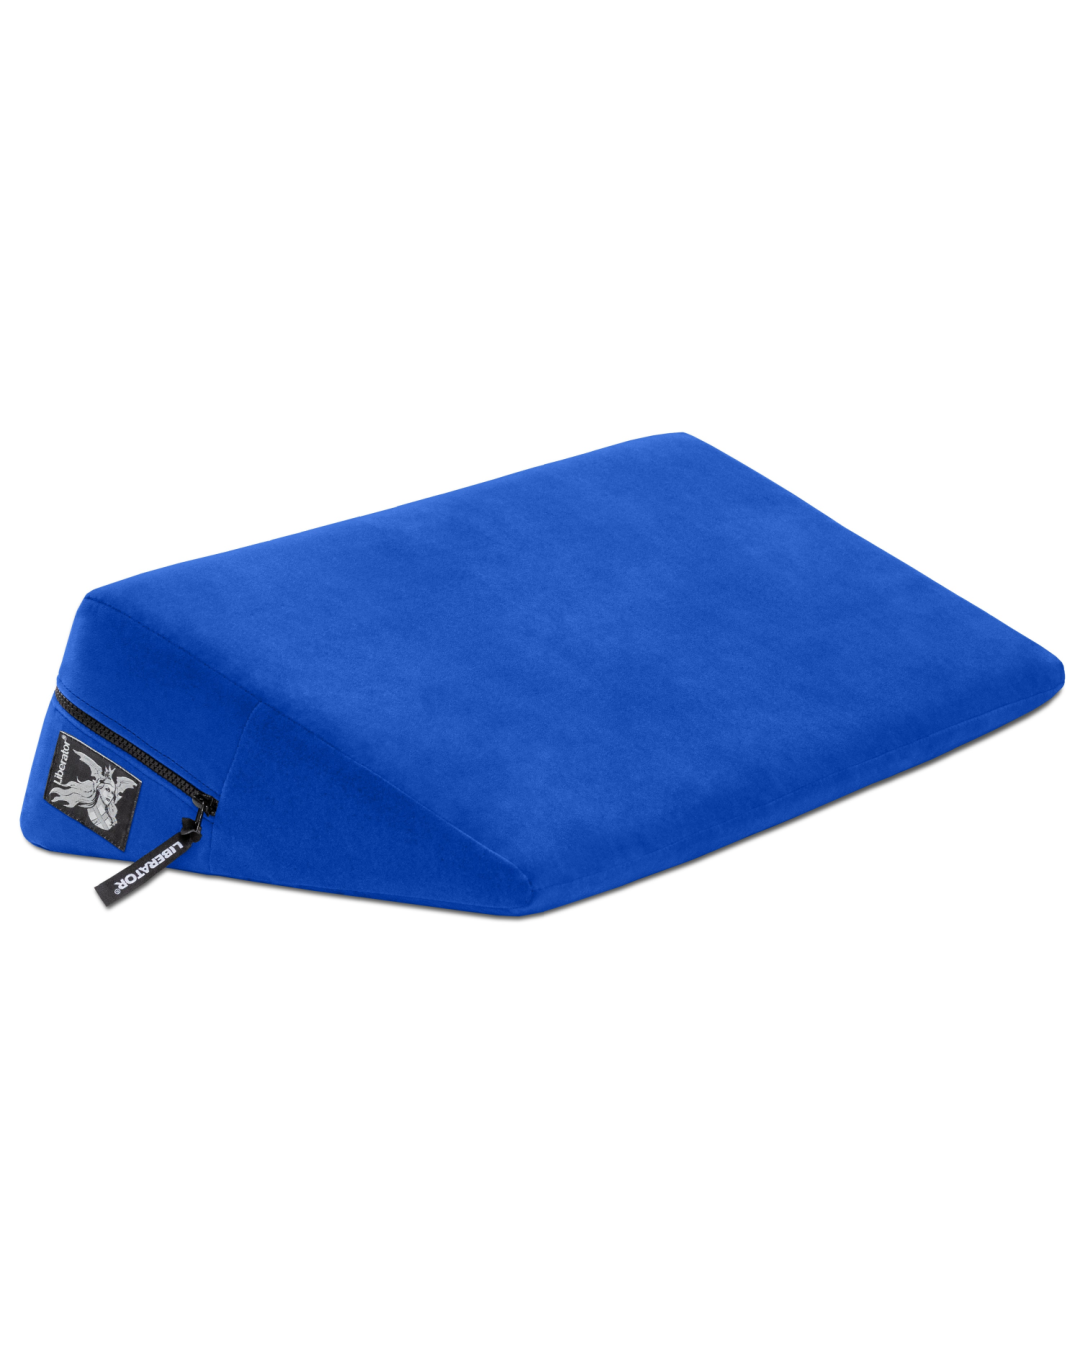 Liberator Wedge 24 Inch Sex Positioning Cushion - Blue